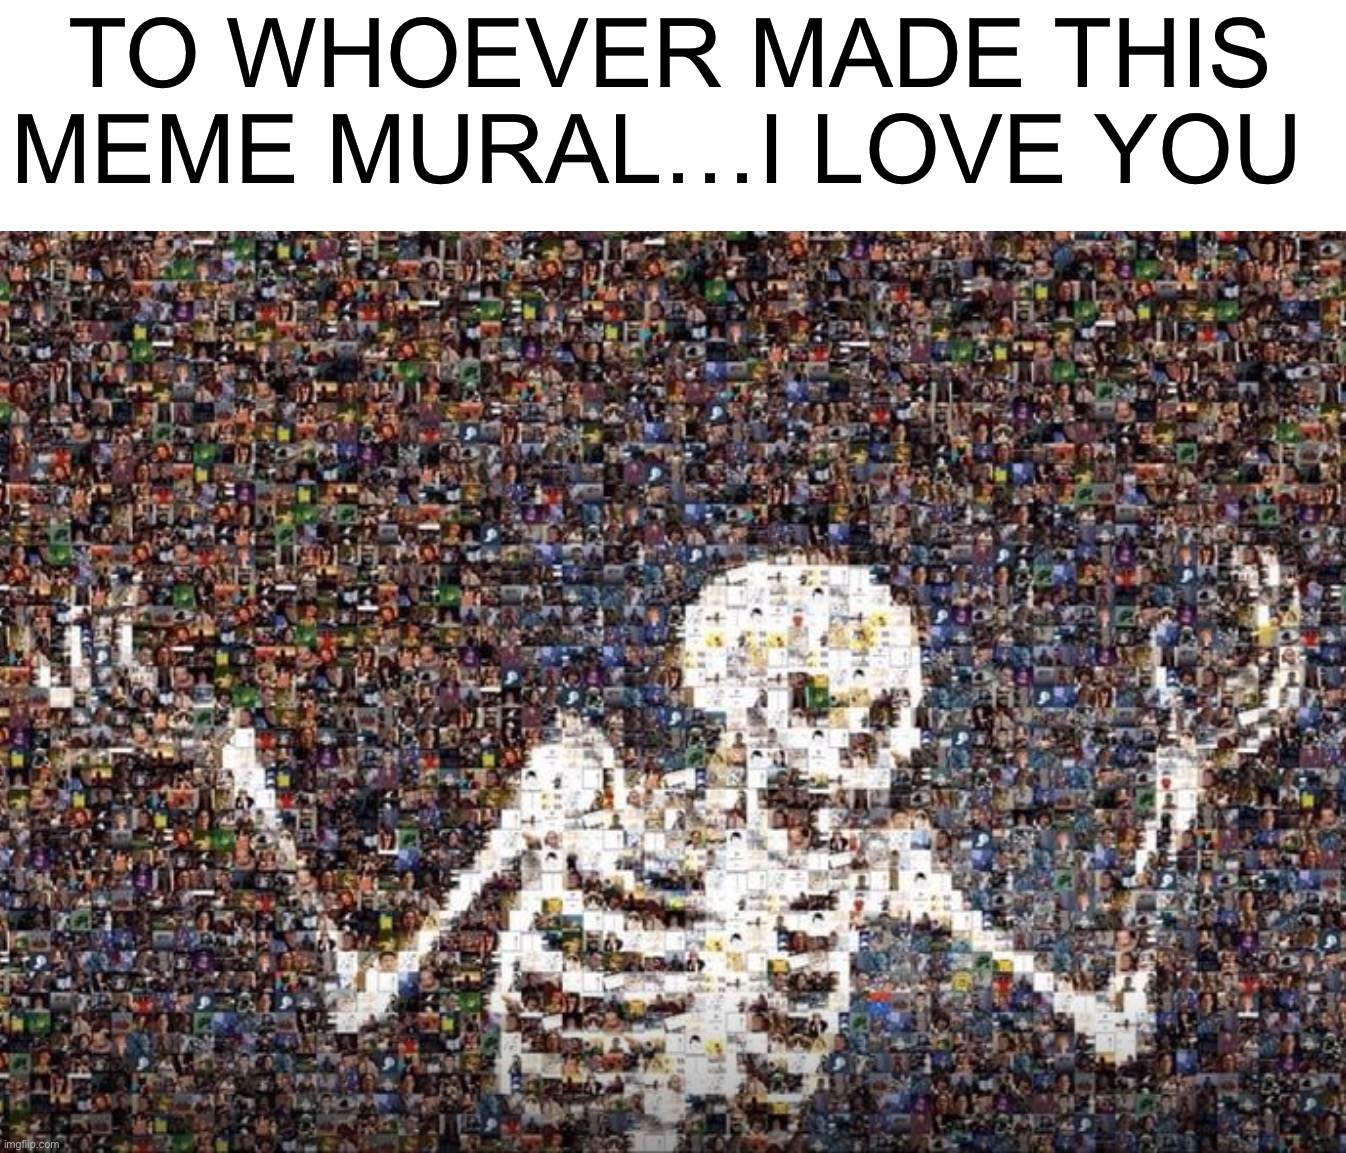 This is some insane skill |  TO WHOEVER MADE THIS MEME MURAL…I LOVE YOU | image tagged in memes,funny,skeleton,spooky scary skeletons,meme mural,skill | made w/ Imgflip meme maker